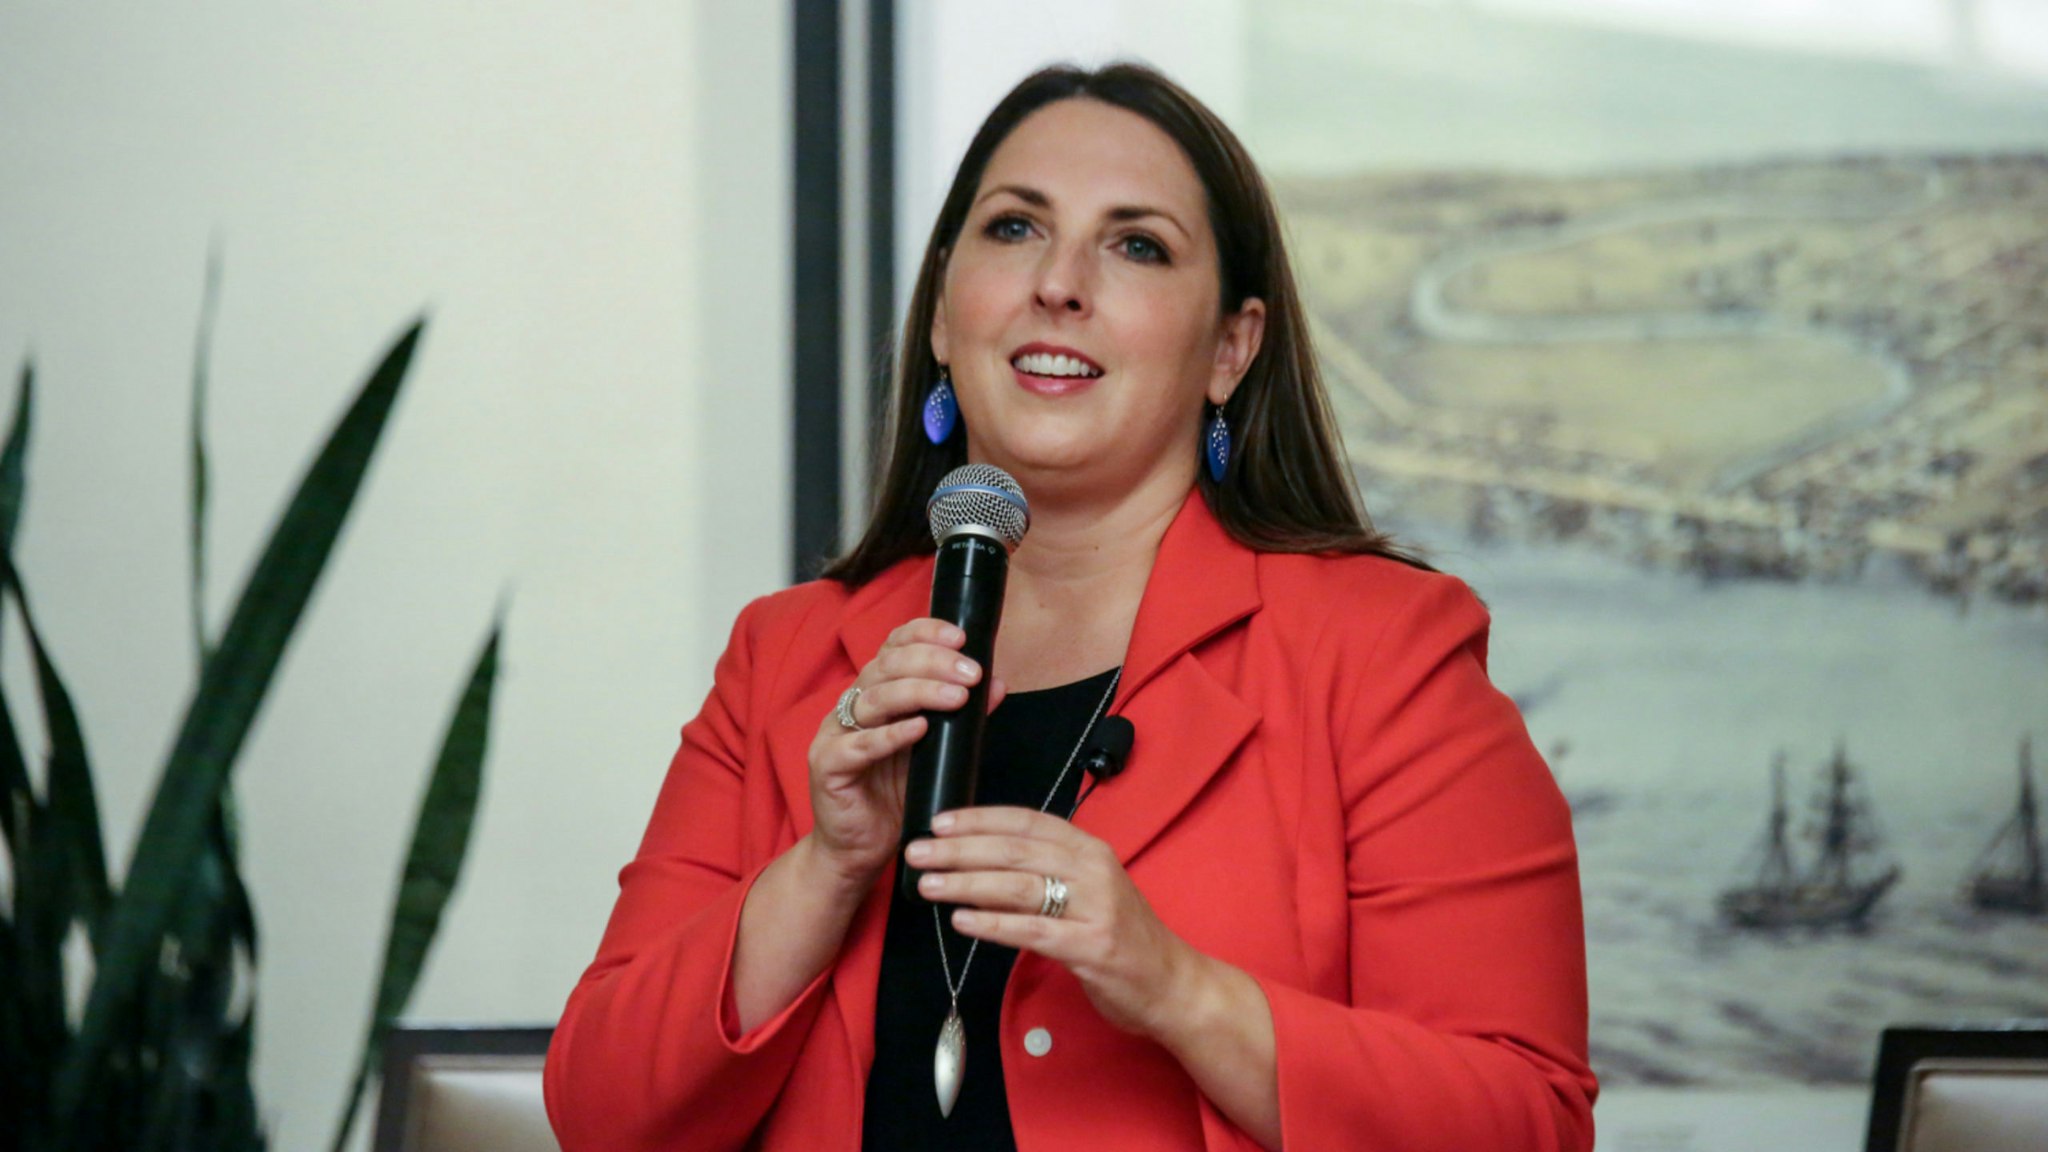 Ronna Romney McDaniel, then chairwoman of the Michigan Republican Party, leads a panel of Republican women to discuss the topic "All Issues are Women's Issues," at the Sheraton hotel on Sept. 19, 2016 in Novi, Mich.